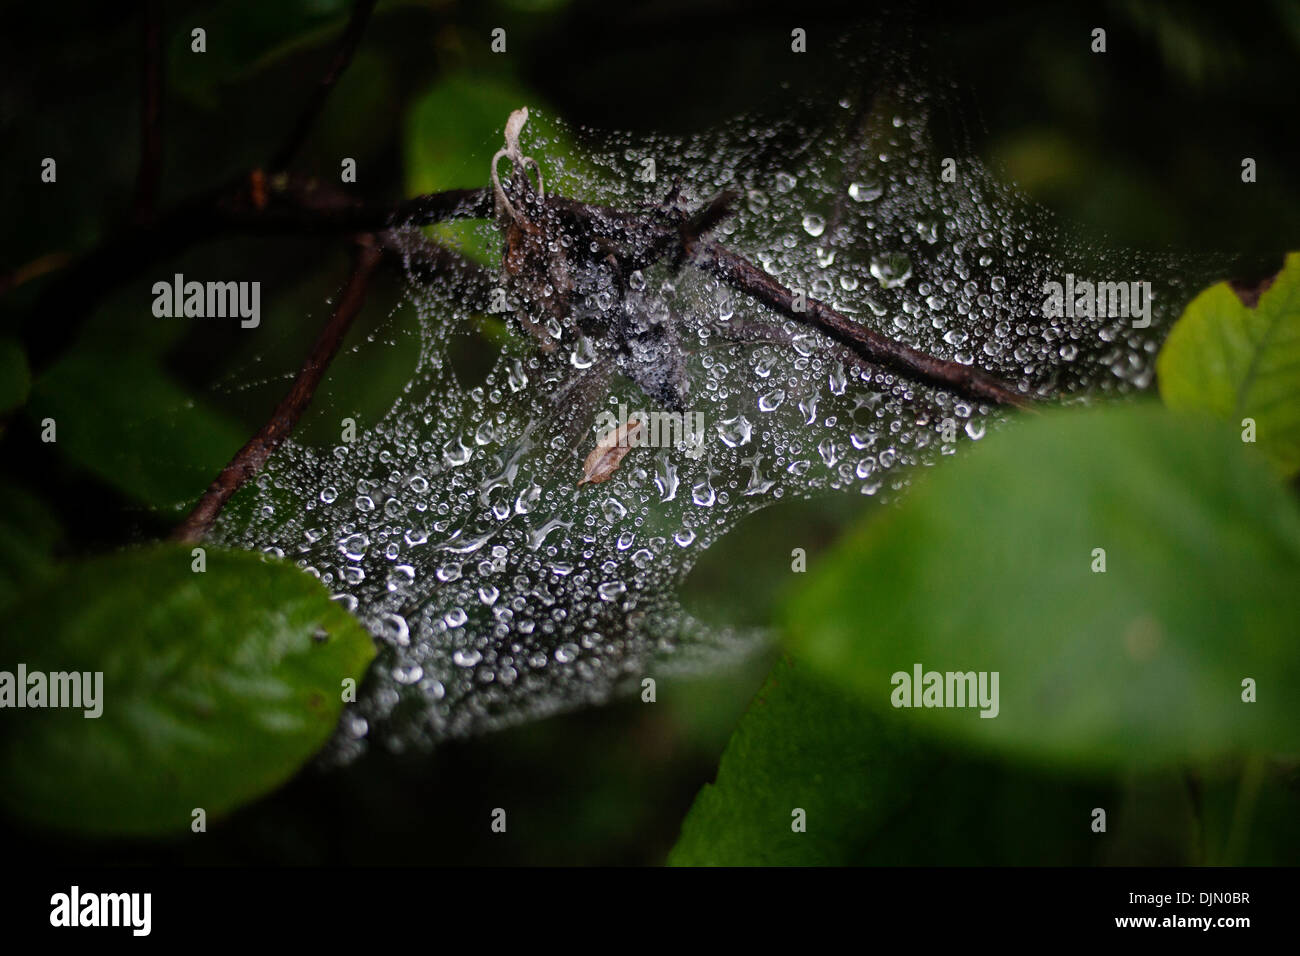 A spider's web covered in rain drops. Stock Photo